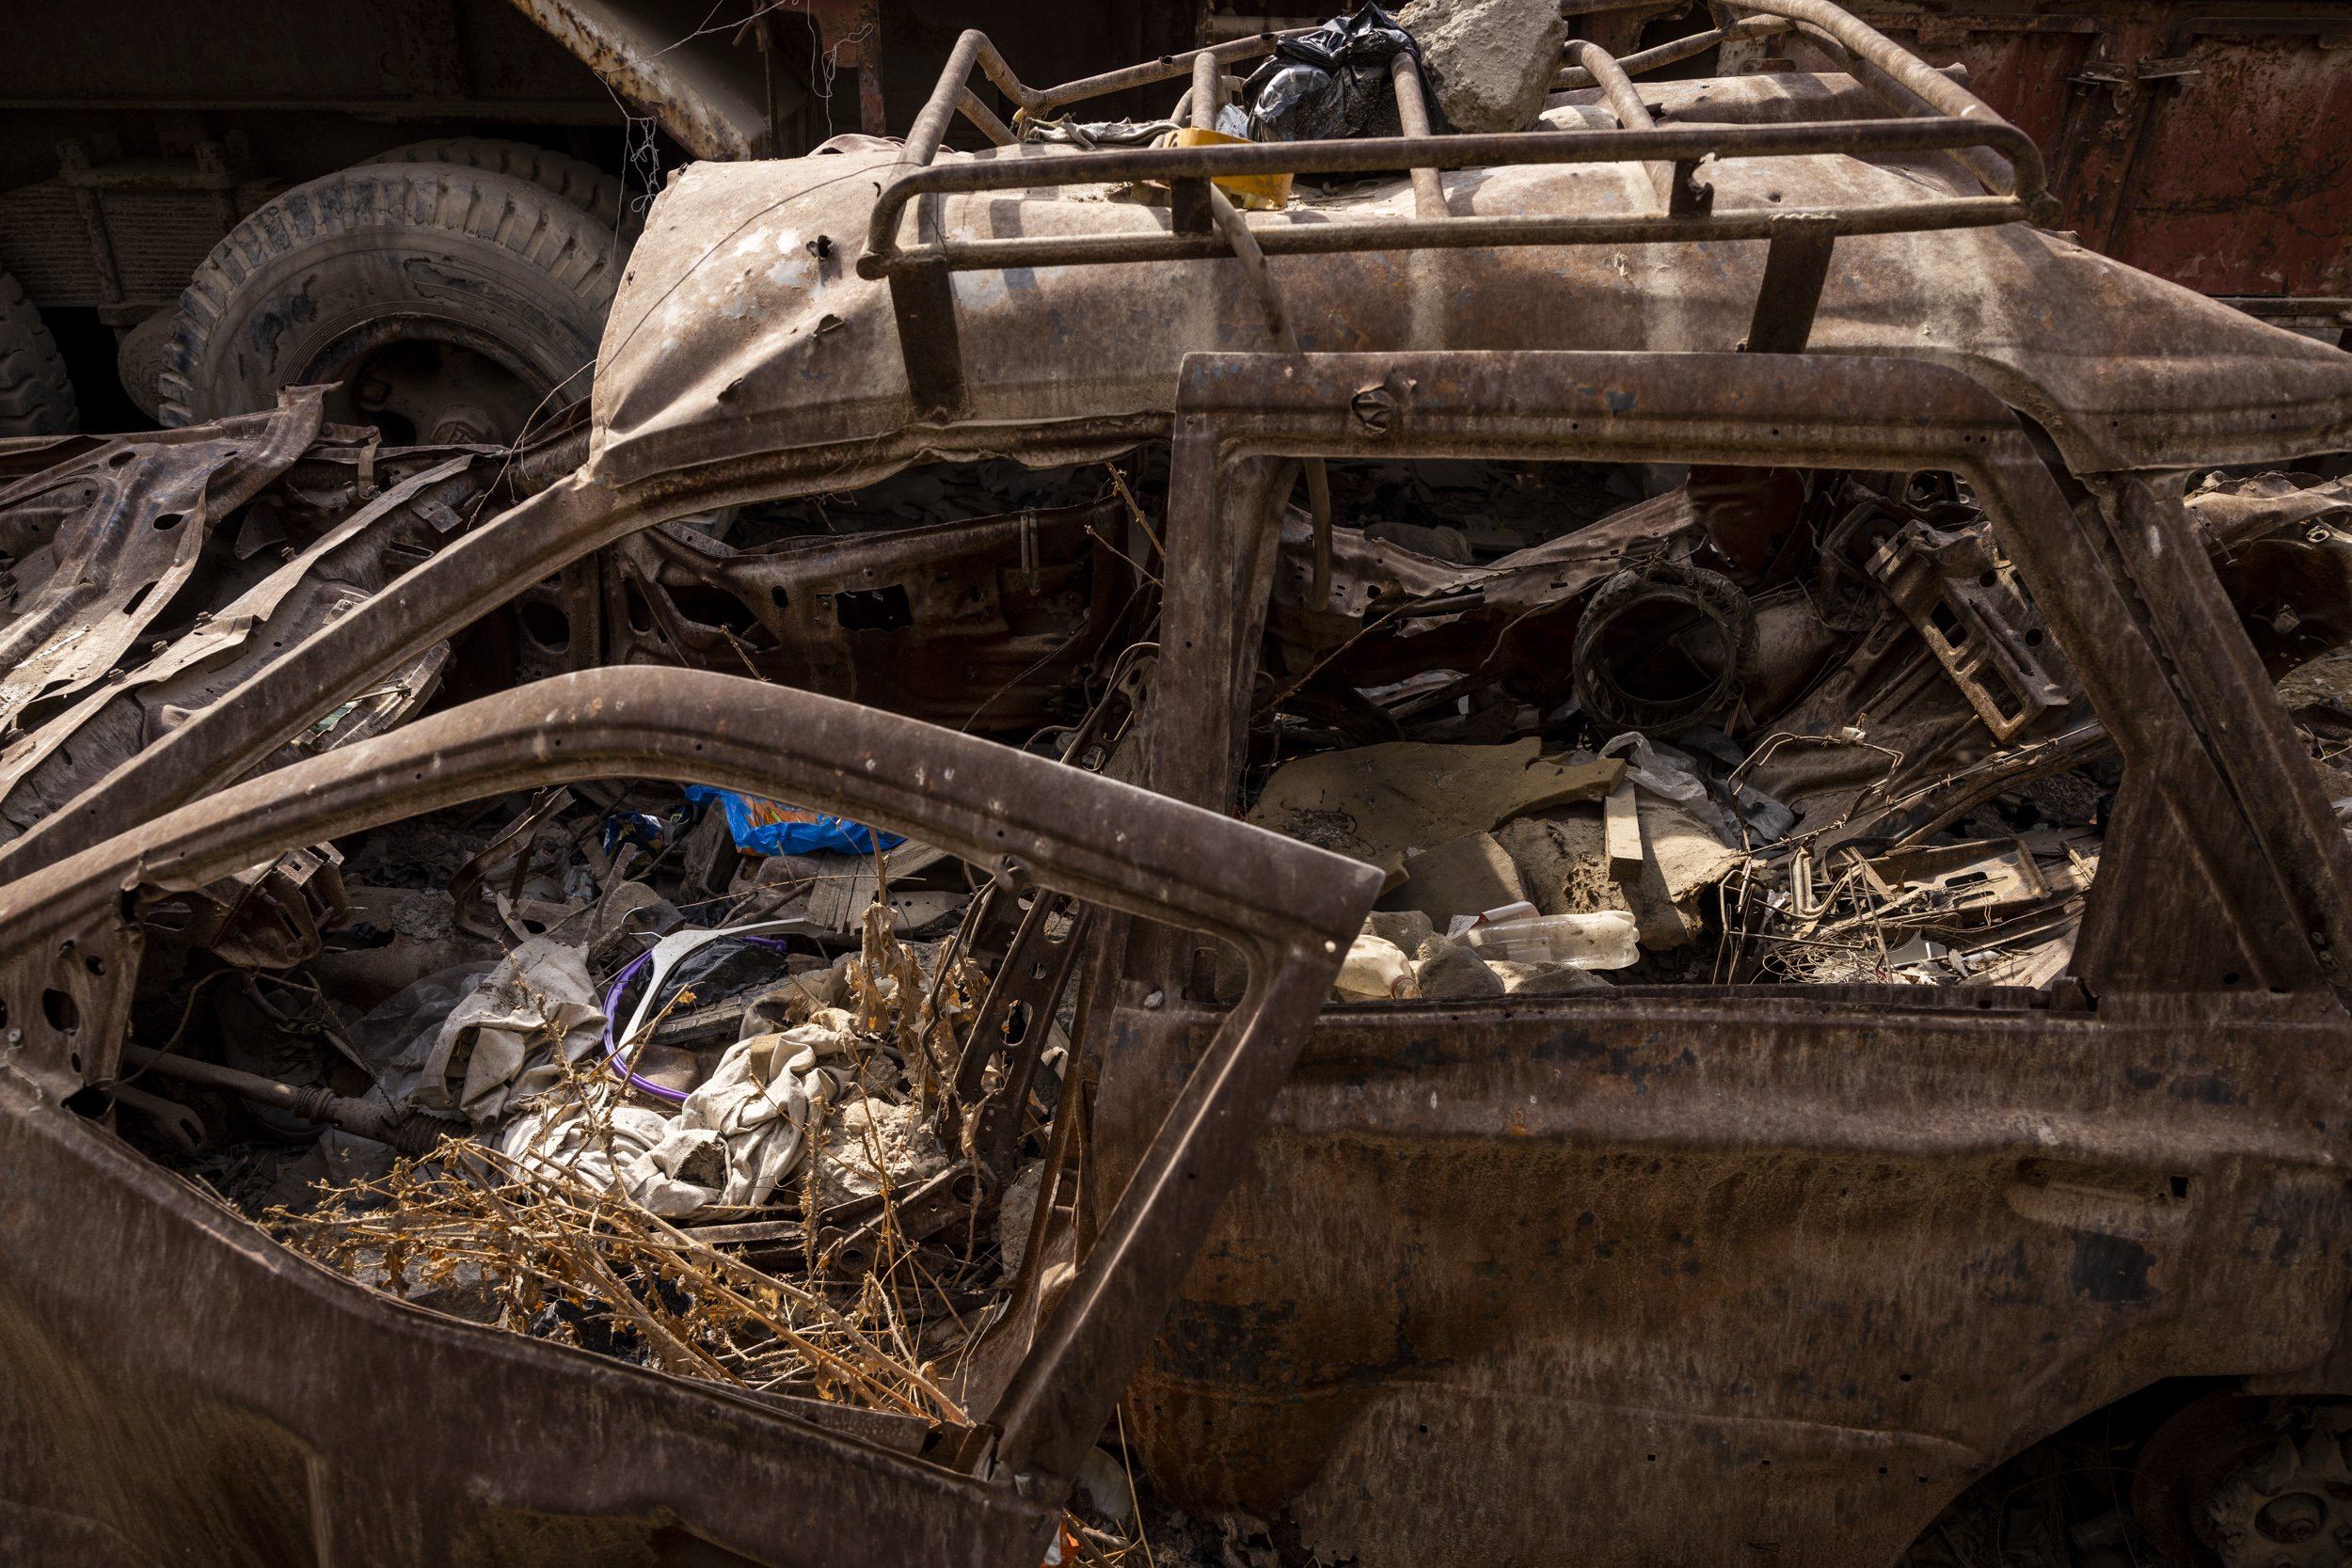  The remnants of the car Younes and family were in in when they were hit lays rusting near the site of the attack.  